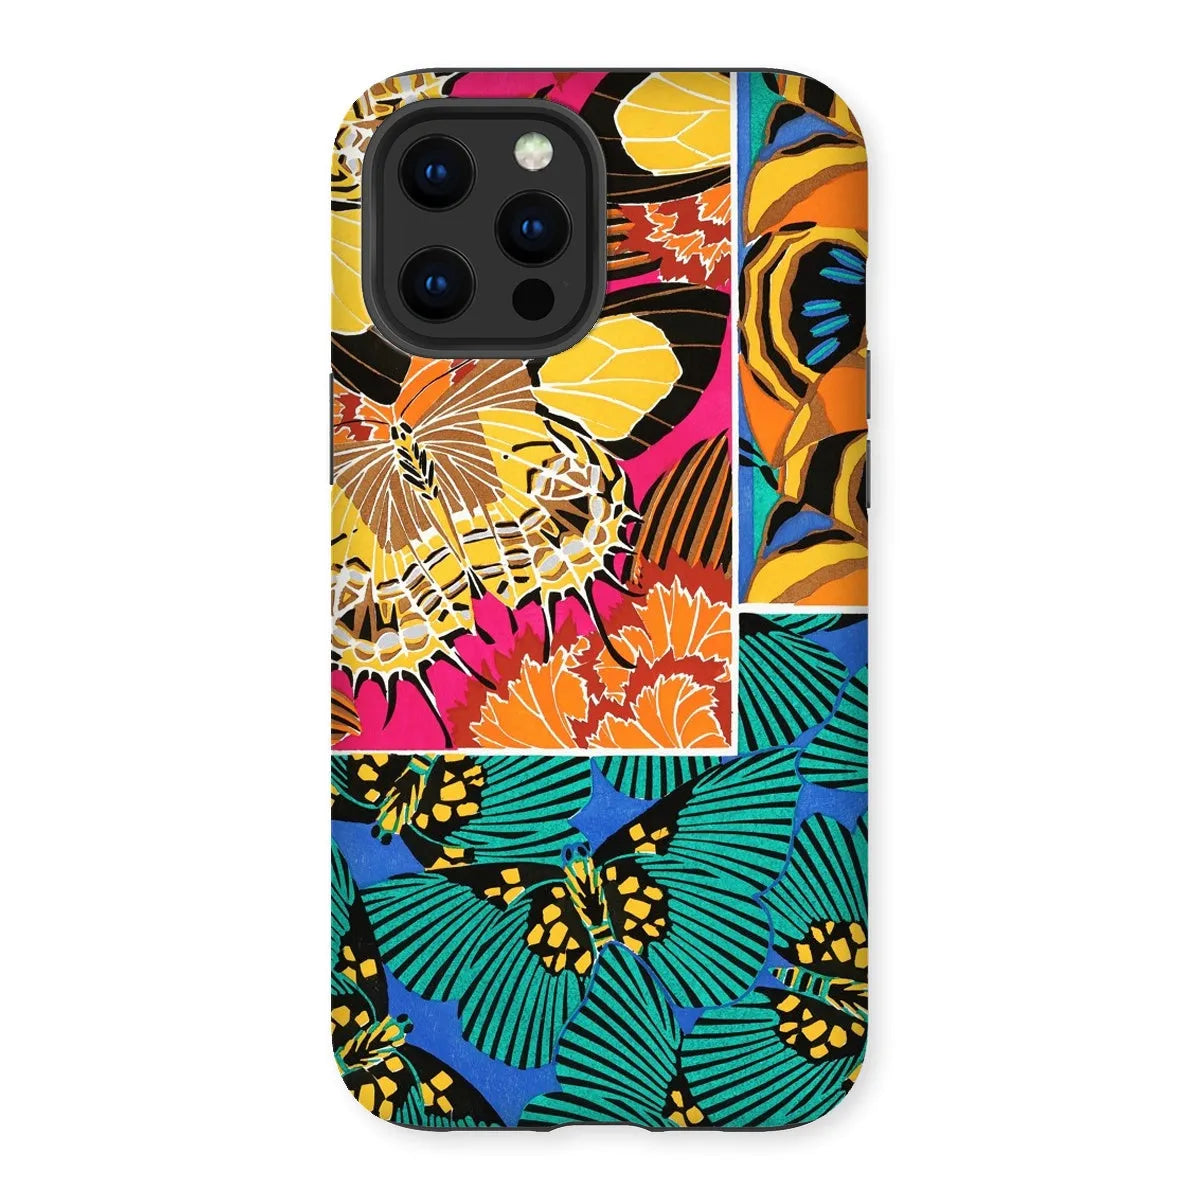 Rainbow Butterfly Aesthetic Art Phone Case - E.a. Seguy - Iphone 12 Pro Max / Matte - Mobile Phone Cases - Aesthetic Art